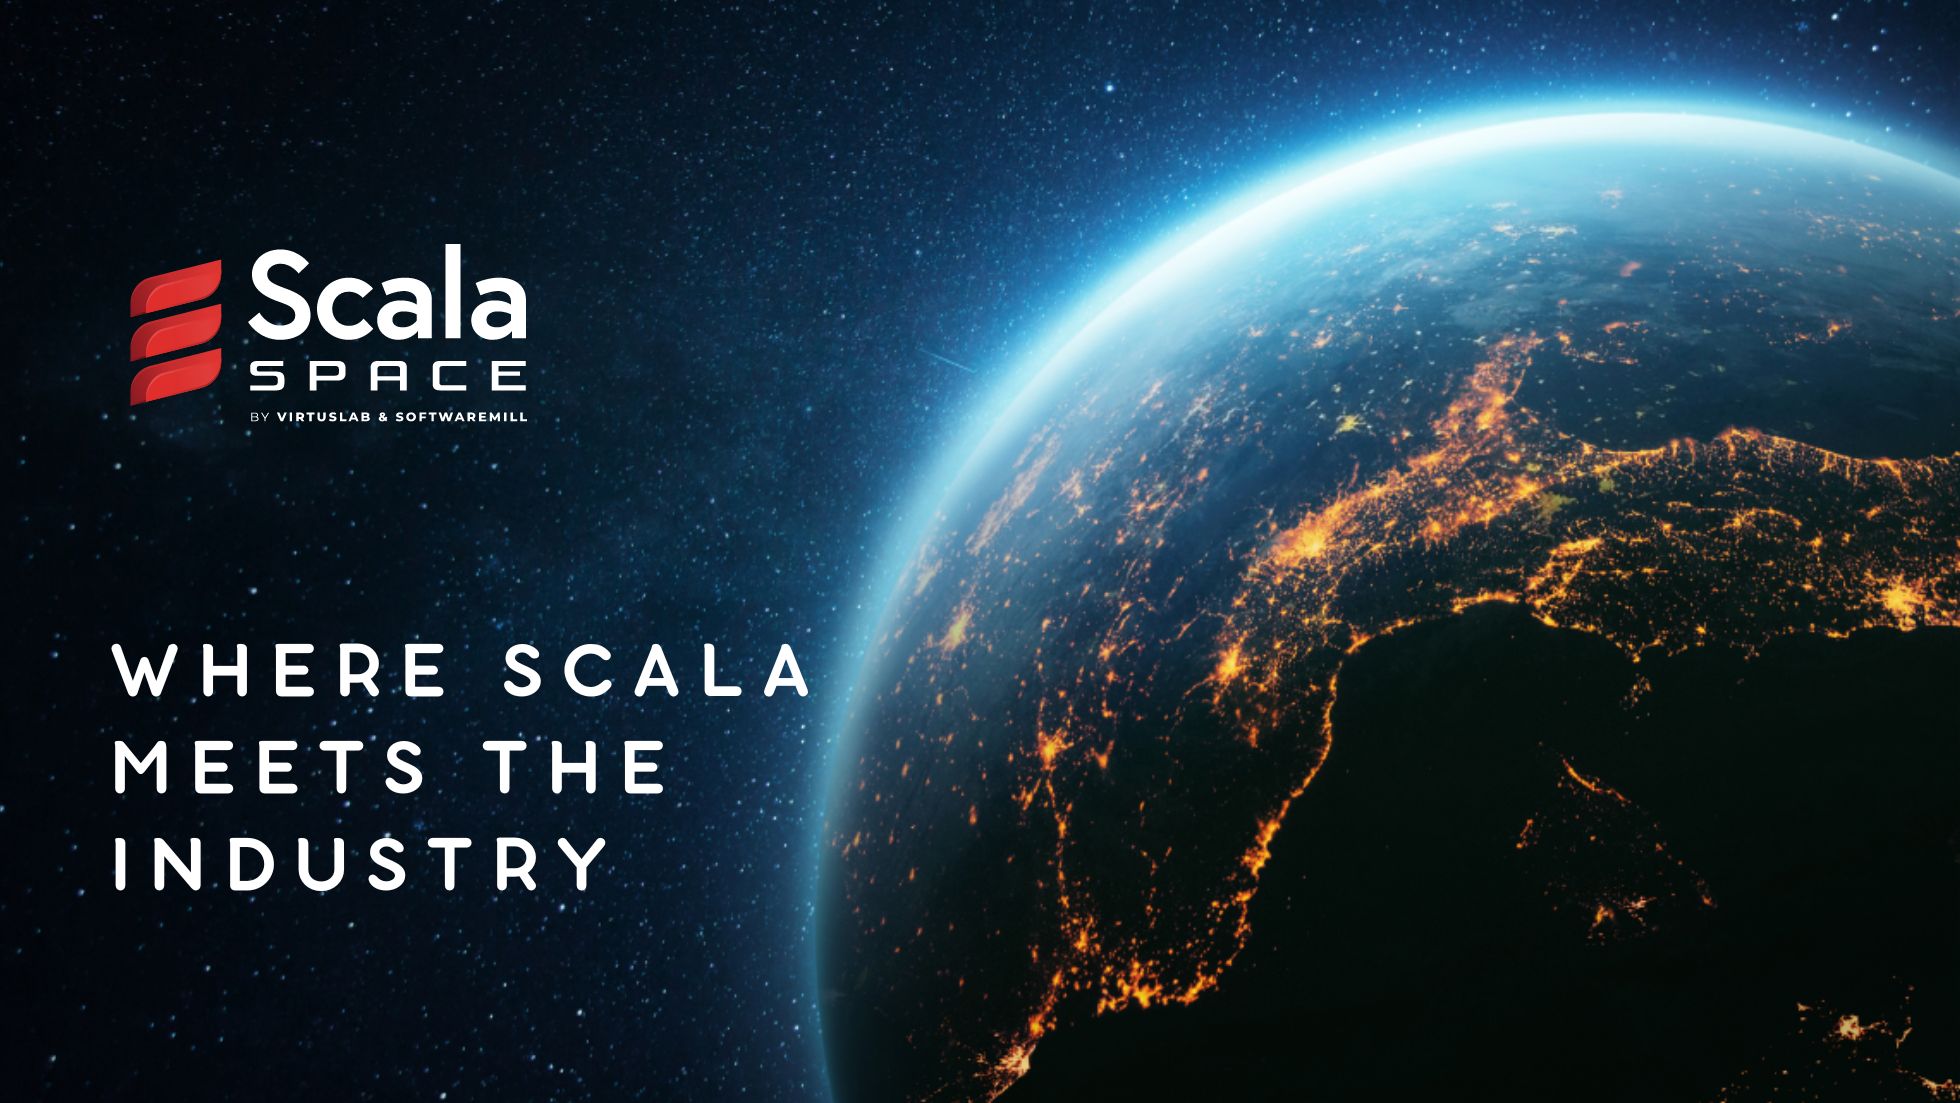 Where Scala meets the industry webp image